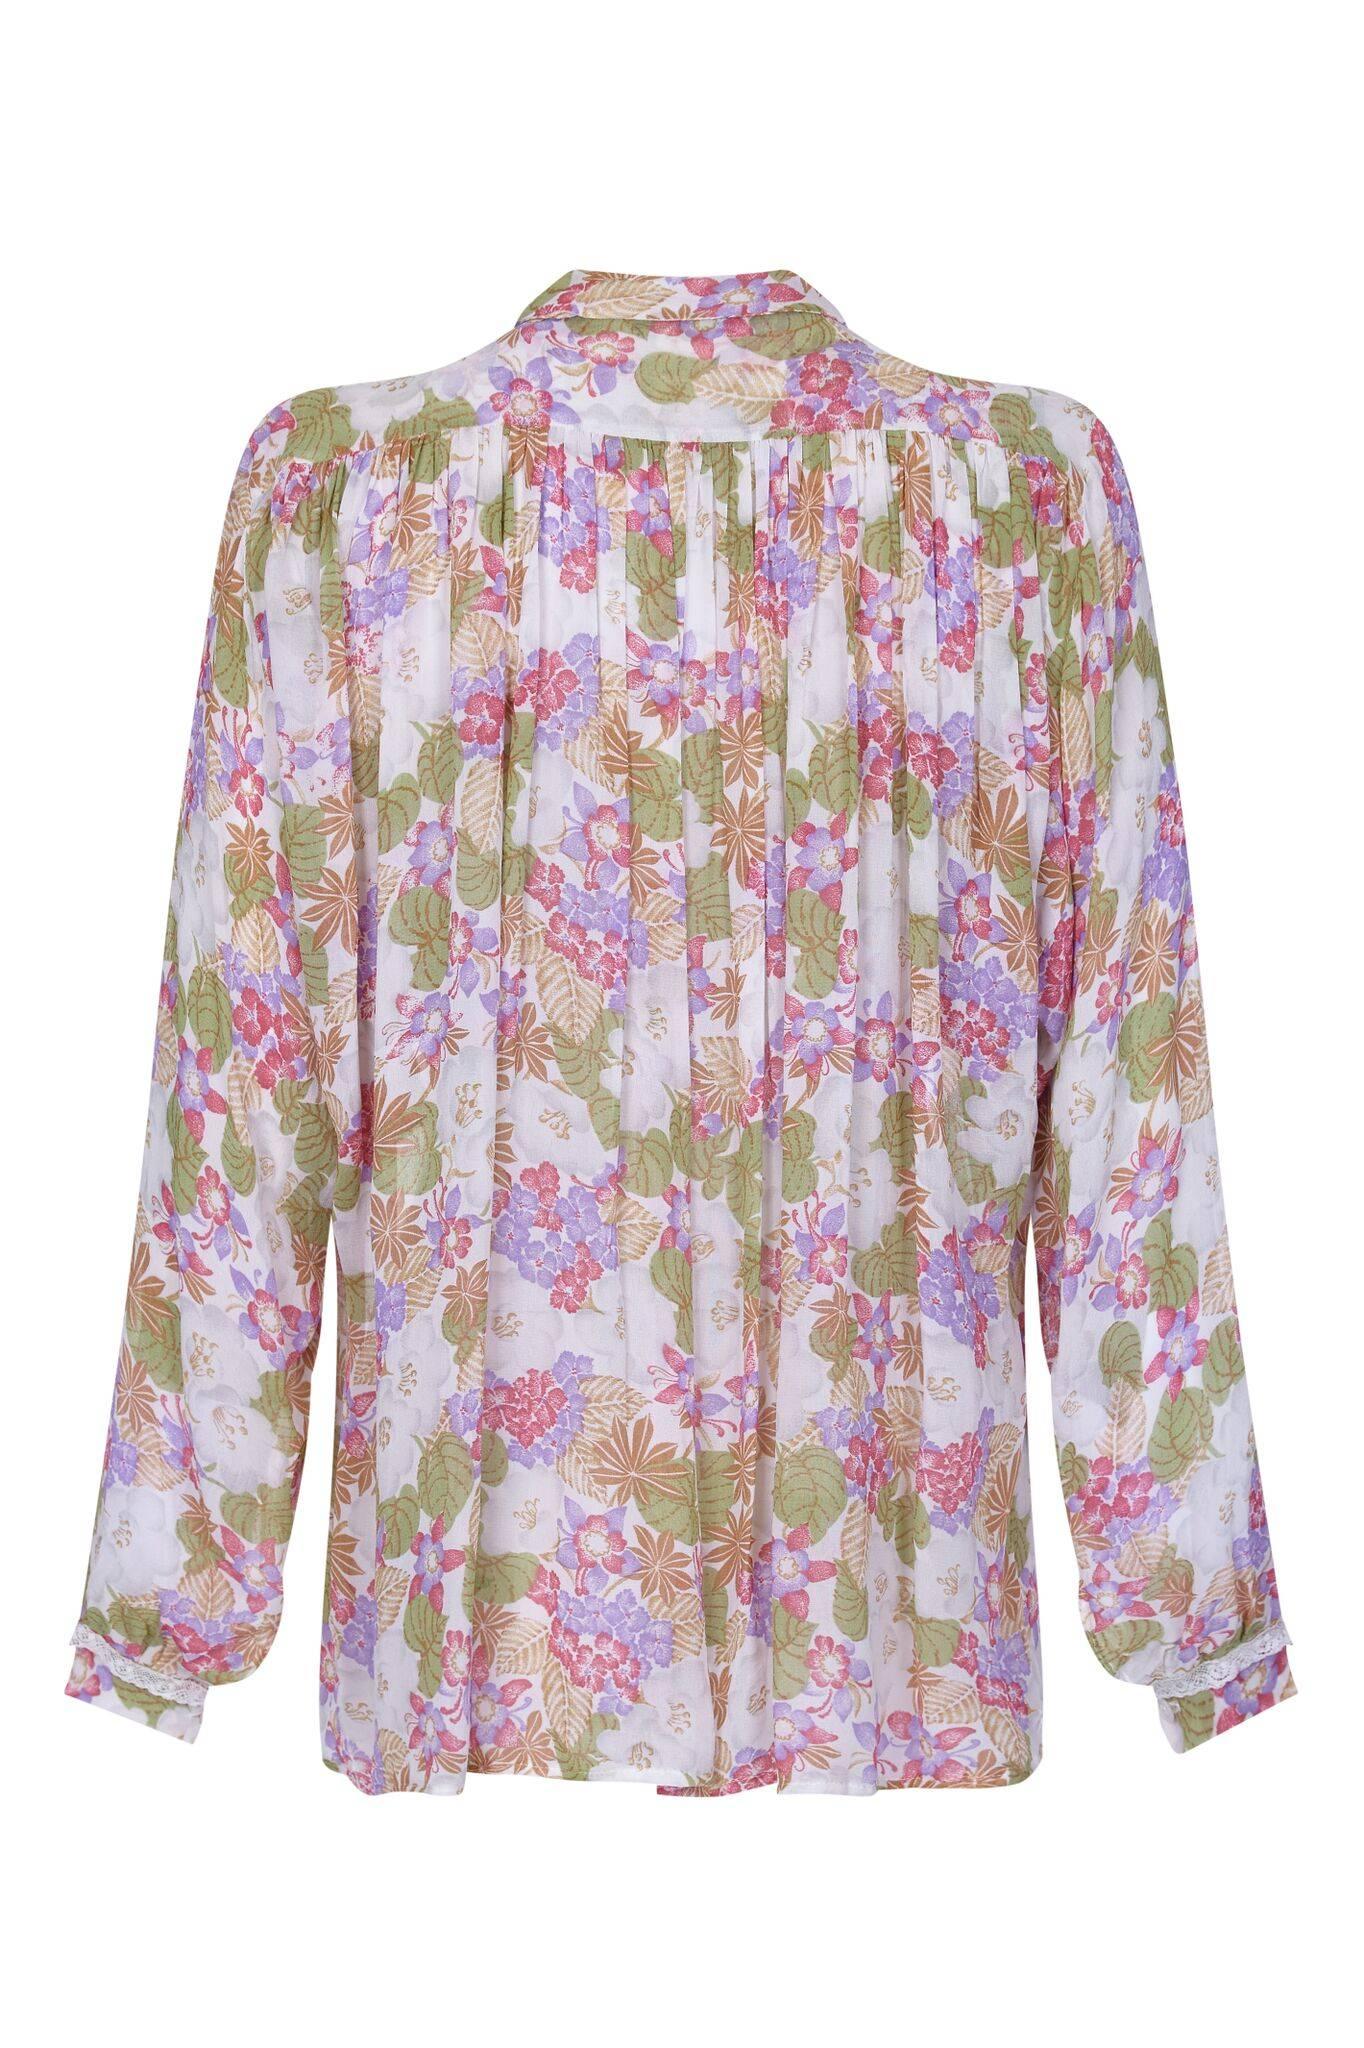 This pretty 1970s Jeff Banks chiffon blouse is gorgeously feminine with some lovely details. The light chiffon has a floral pattern of pastel tones in ivory, soft green, ochre, rose pink and lilac. The generous cut of the fabric and batwing sleeves